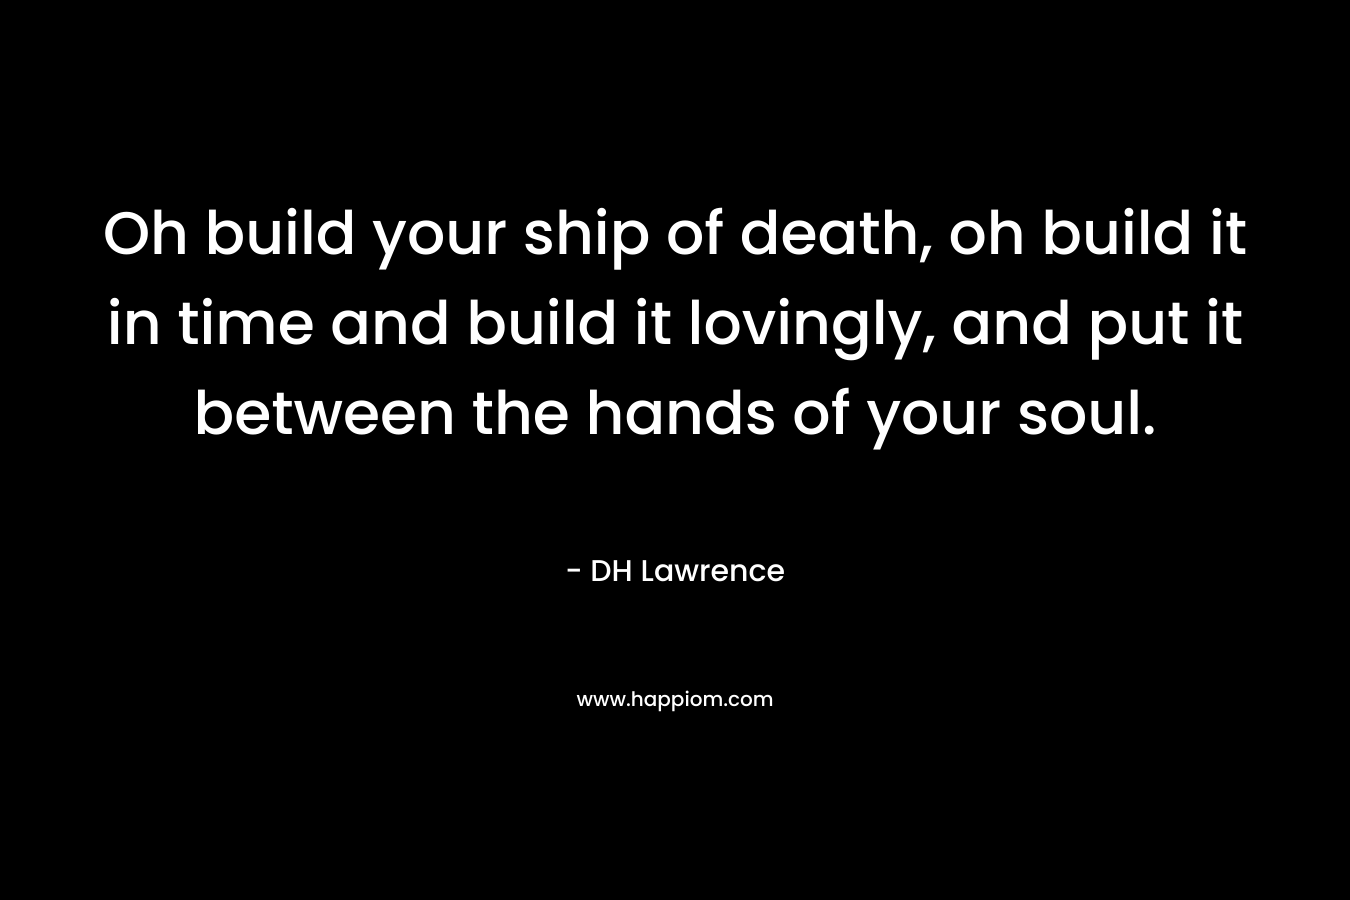 Oh build your ship of death, oh build it in time and build it lovingly, and put it between the hands of your soul.